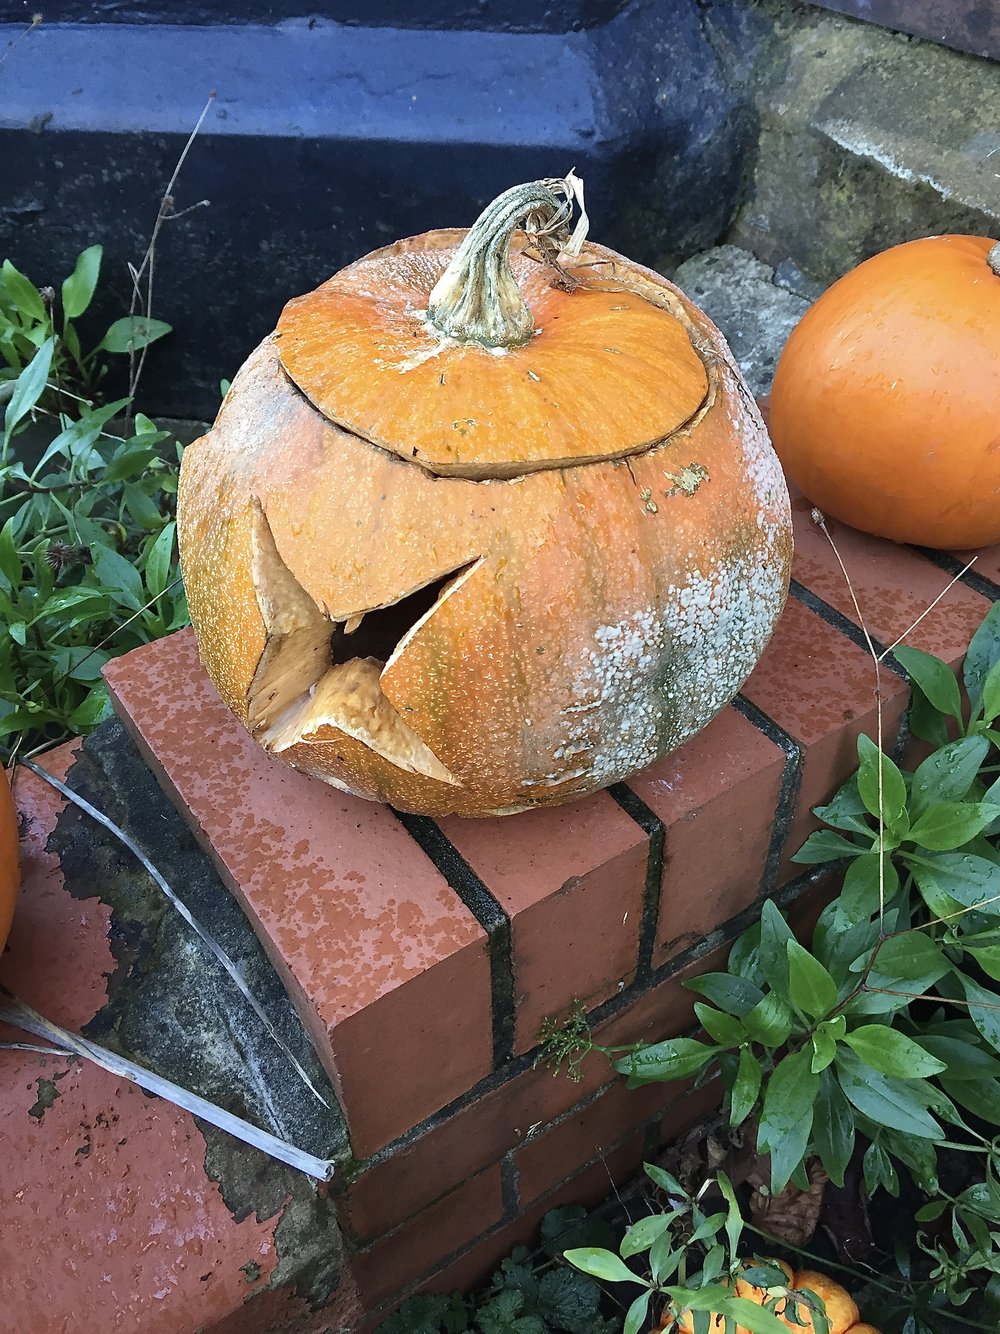  Another carved orange pumpkin, mould growing on various parts. 